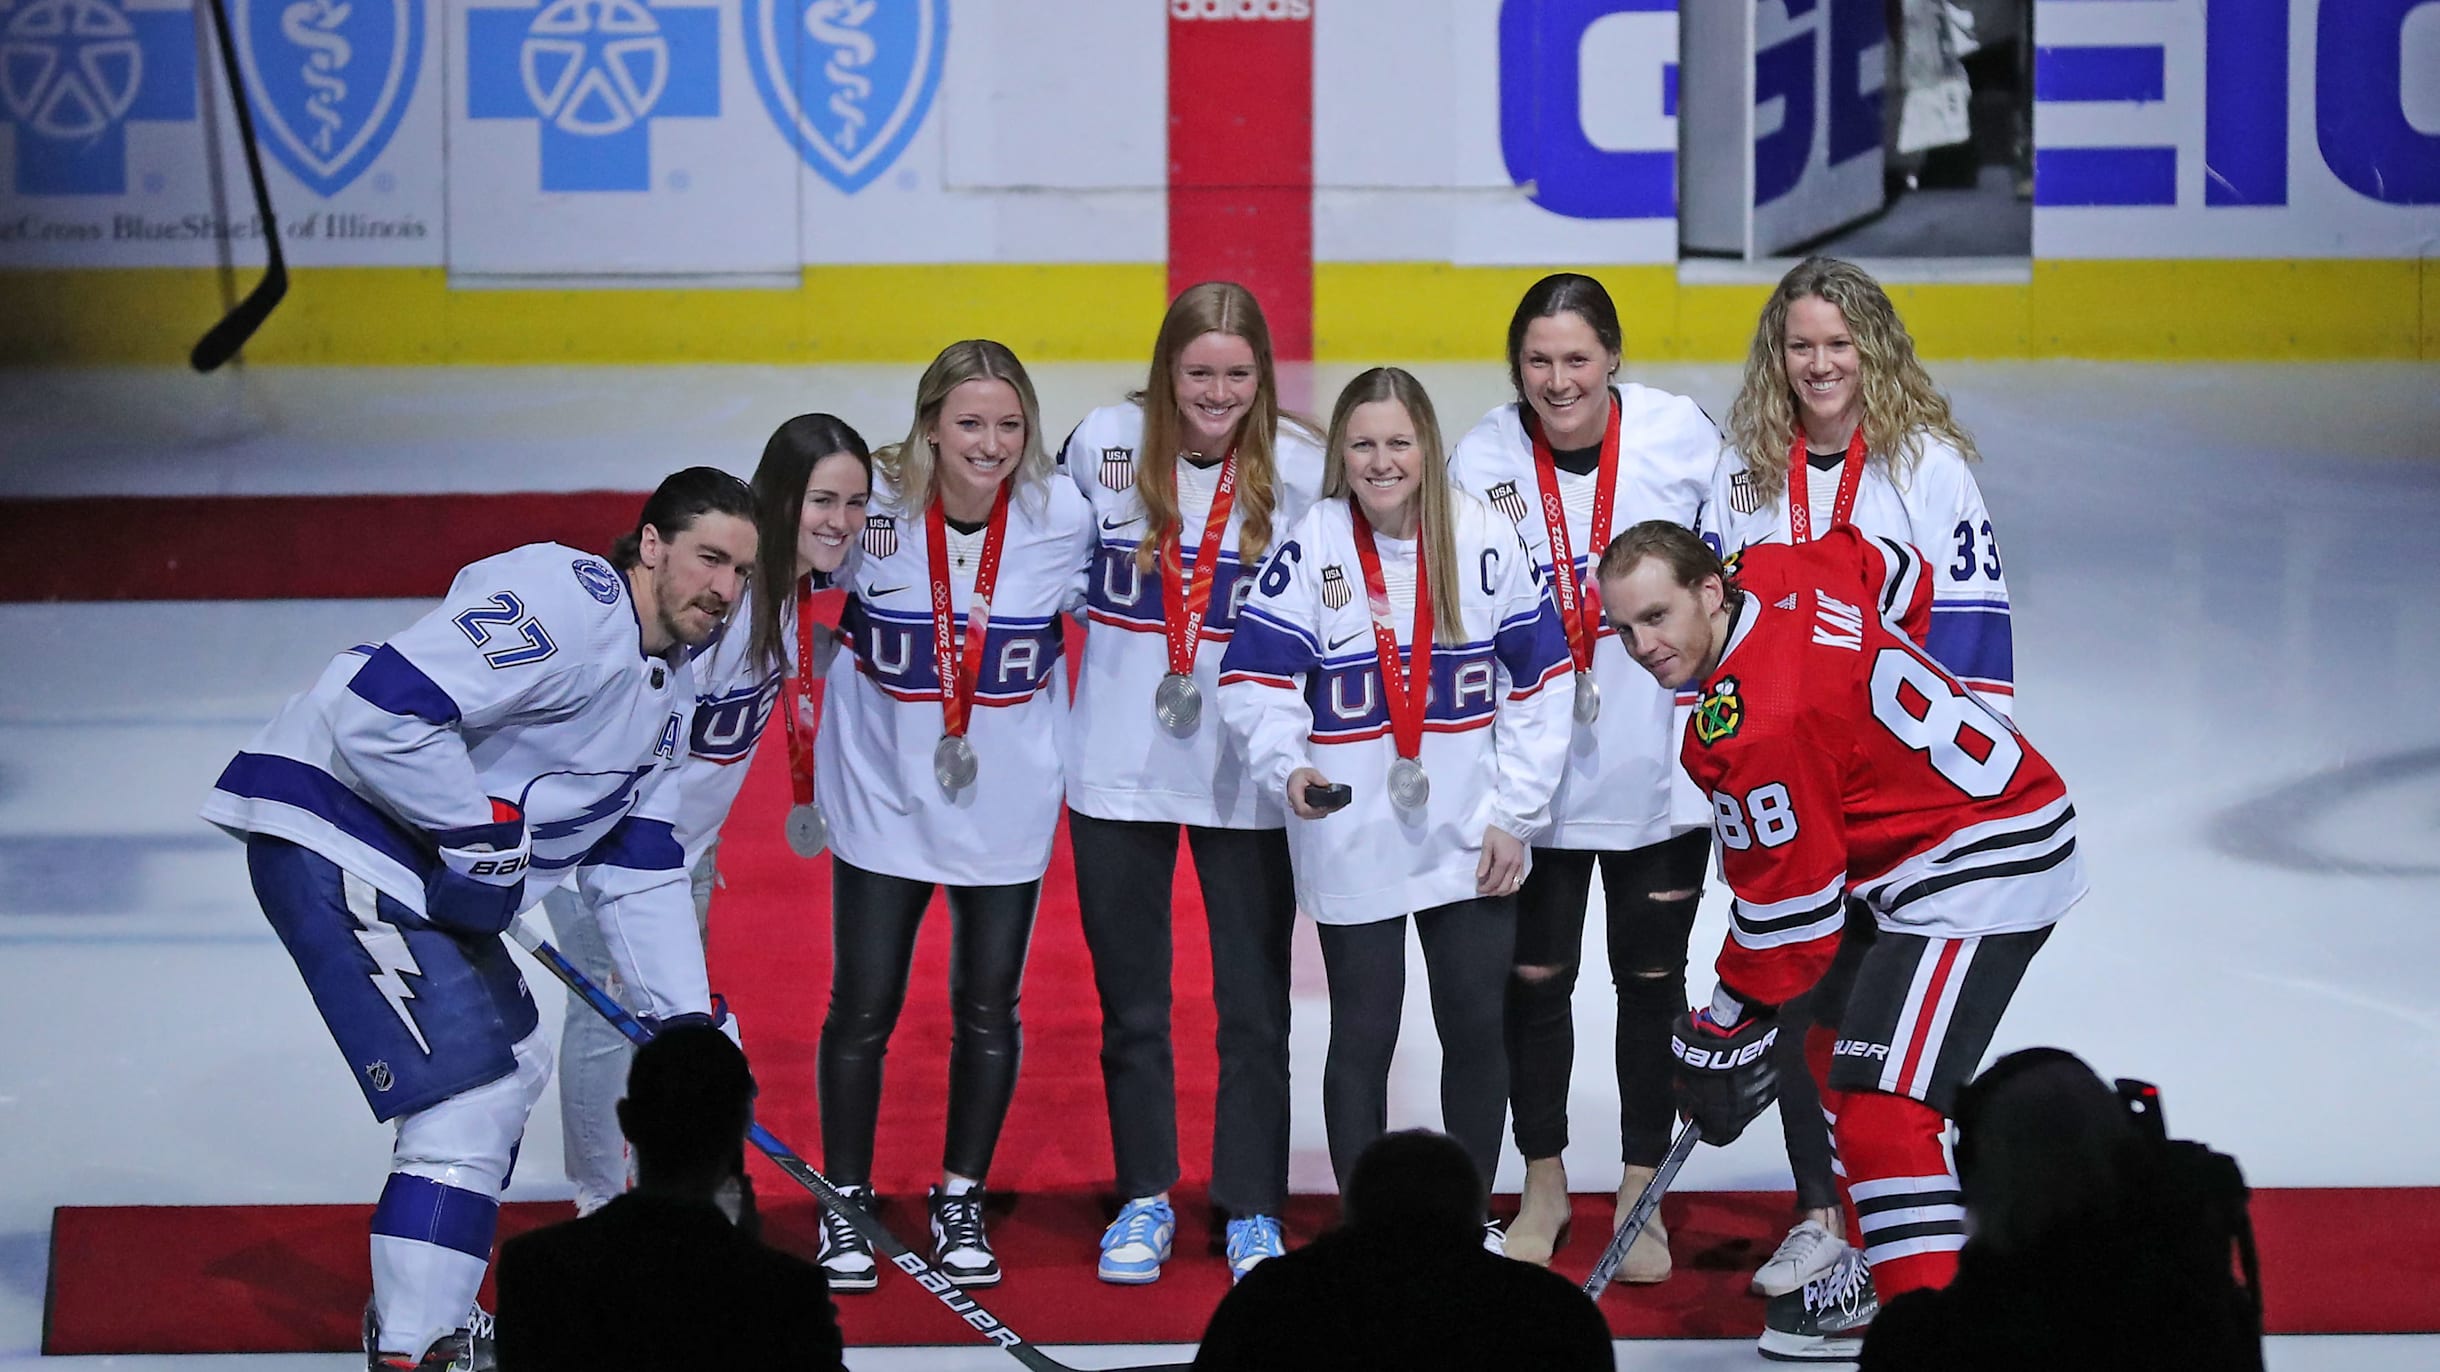 Kendall Coyne Schofield (26) skates with the puck, 2024 Paris Olympics